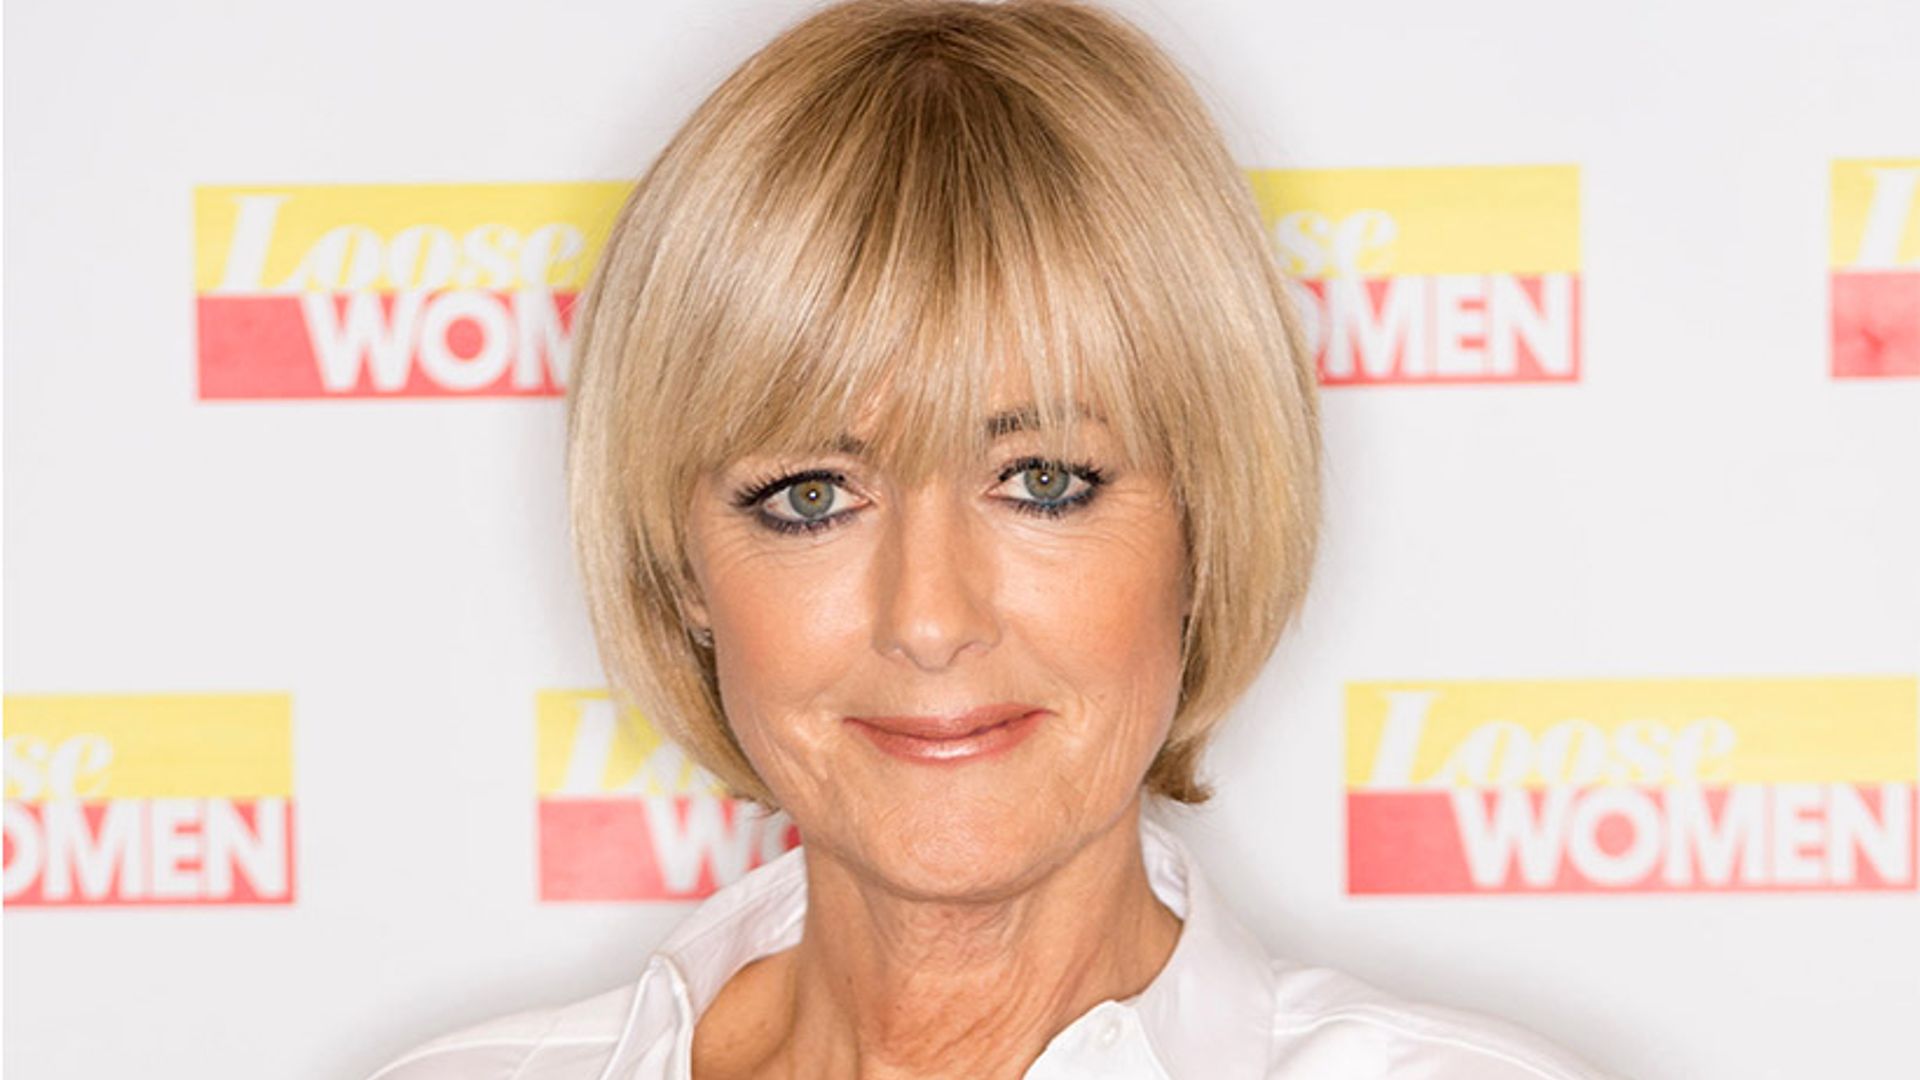 Jane Moore just styled her Marks & Spencer shirt in a genius way